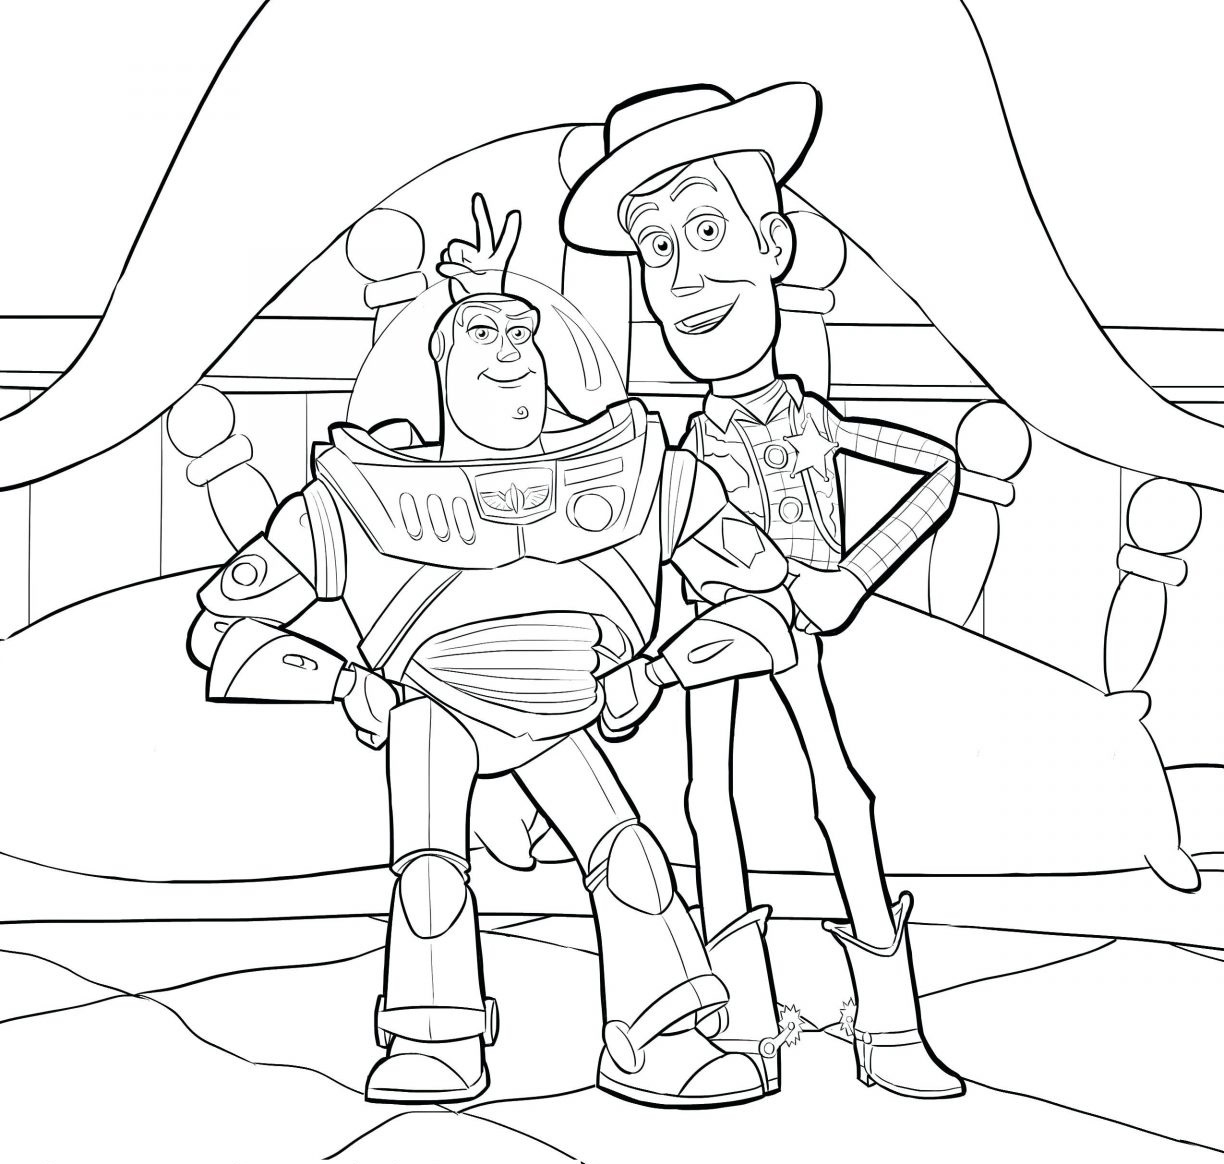 Bo Peep Toy Story 4 Coloring Page - Get Ready For Toy Story 4 With Free